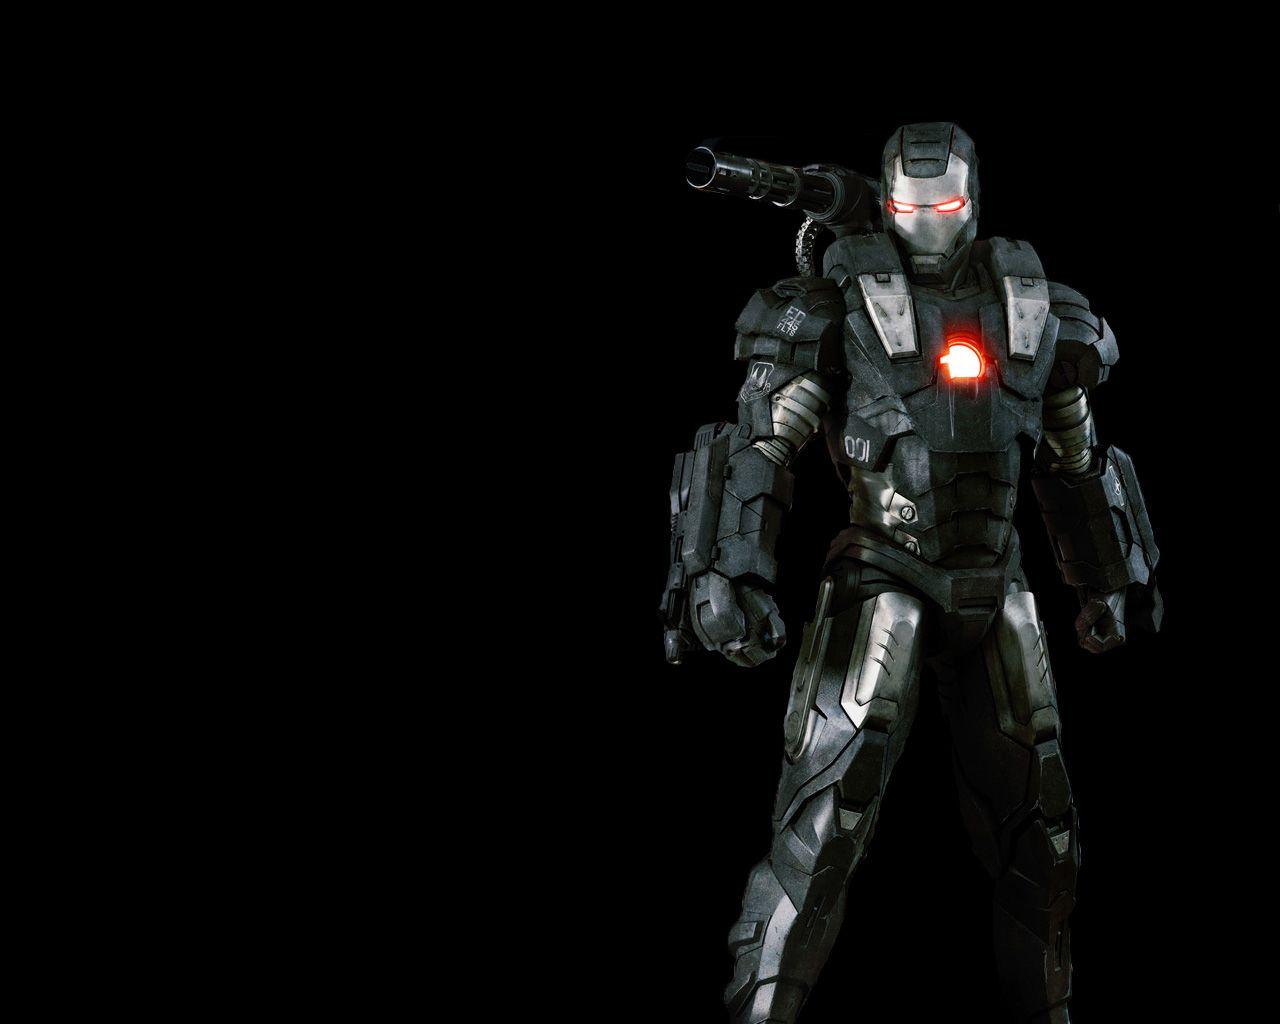 EVERY THING HD WALLPAPERS: Iron Man HD Wallpaper 2013